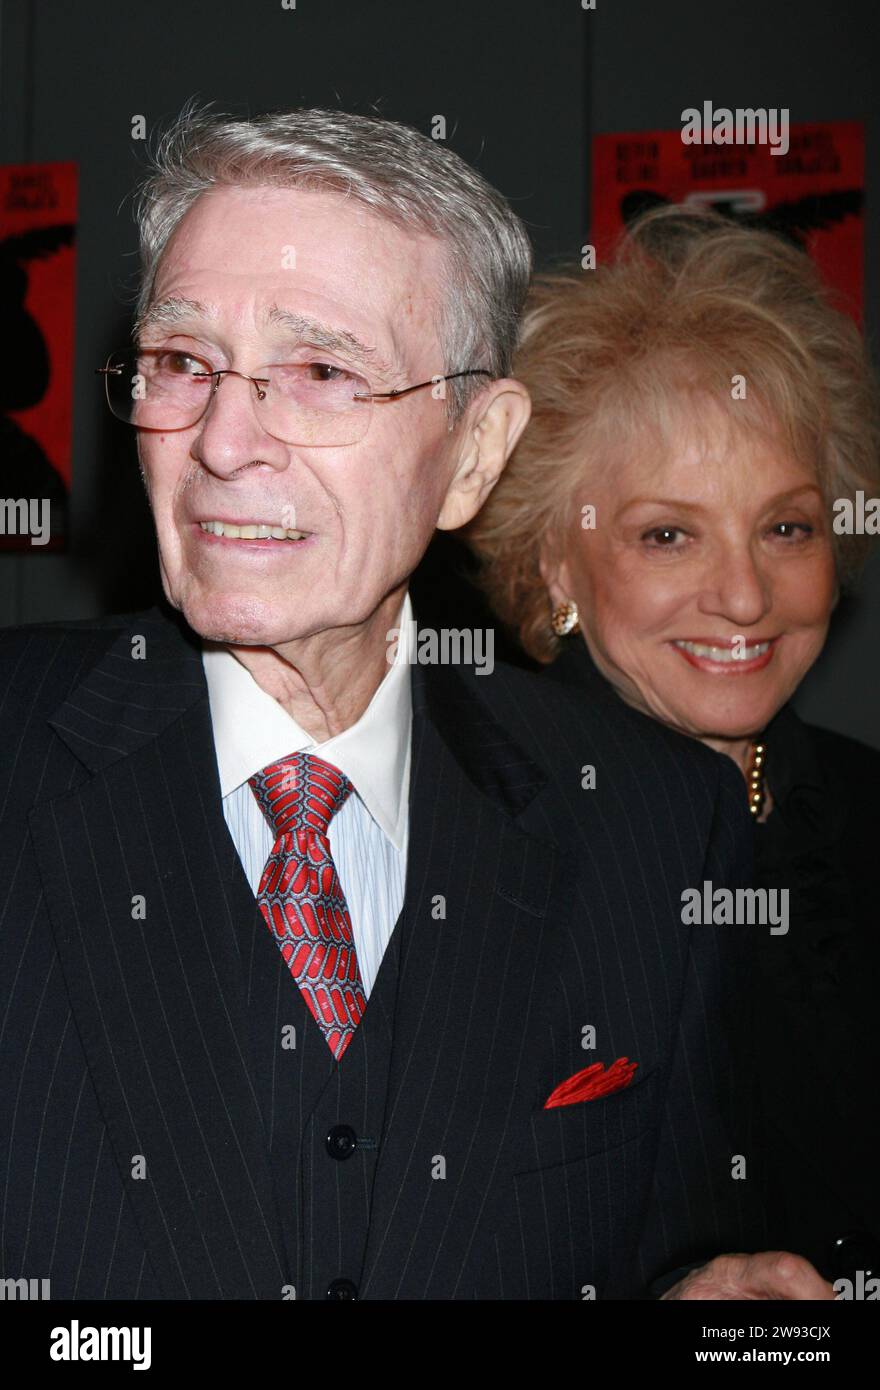 **FILE PHOTO** Selma Archerd Has Passed Away. Army Archerd and Selma Archerd attend the opening night performance of the new production of 'Cyrano de Bergerac' at the Richard Rogers Theatre in New York City on November 1, 2007. Photo Credit: Henry McGee/MediaPunch Credit: MediaPunch Inc/Alamy Live News Stock Photo